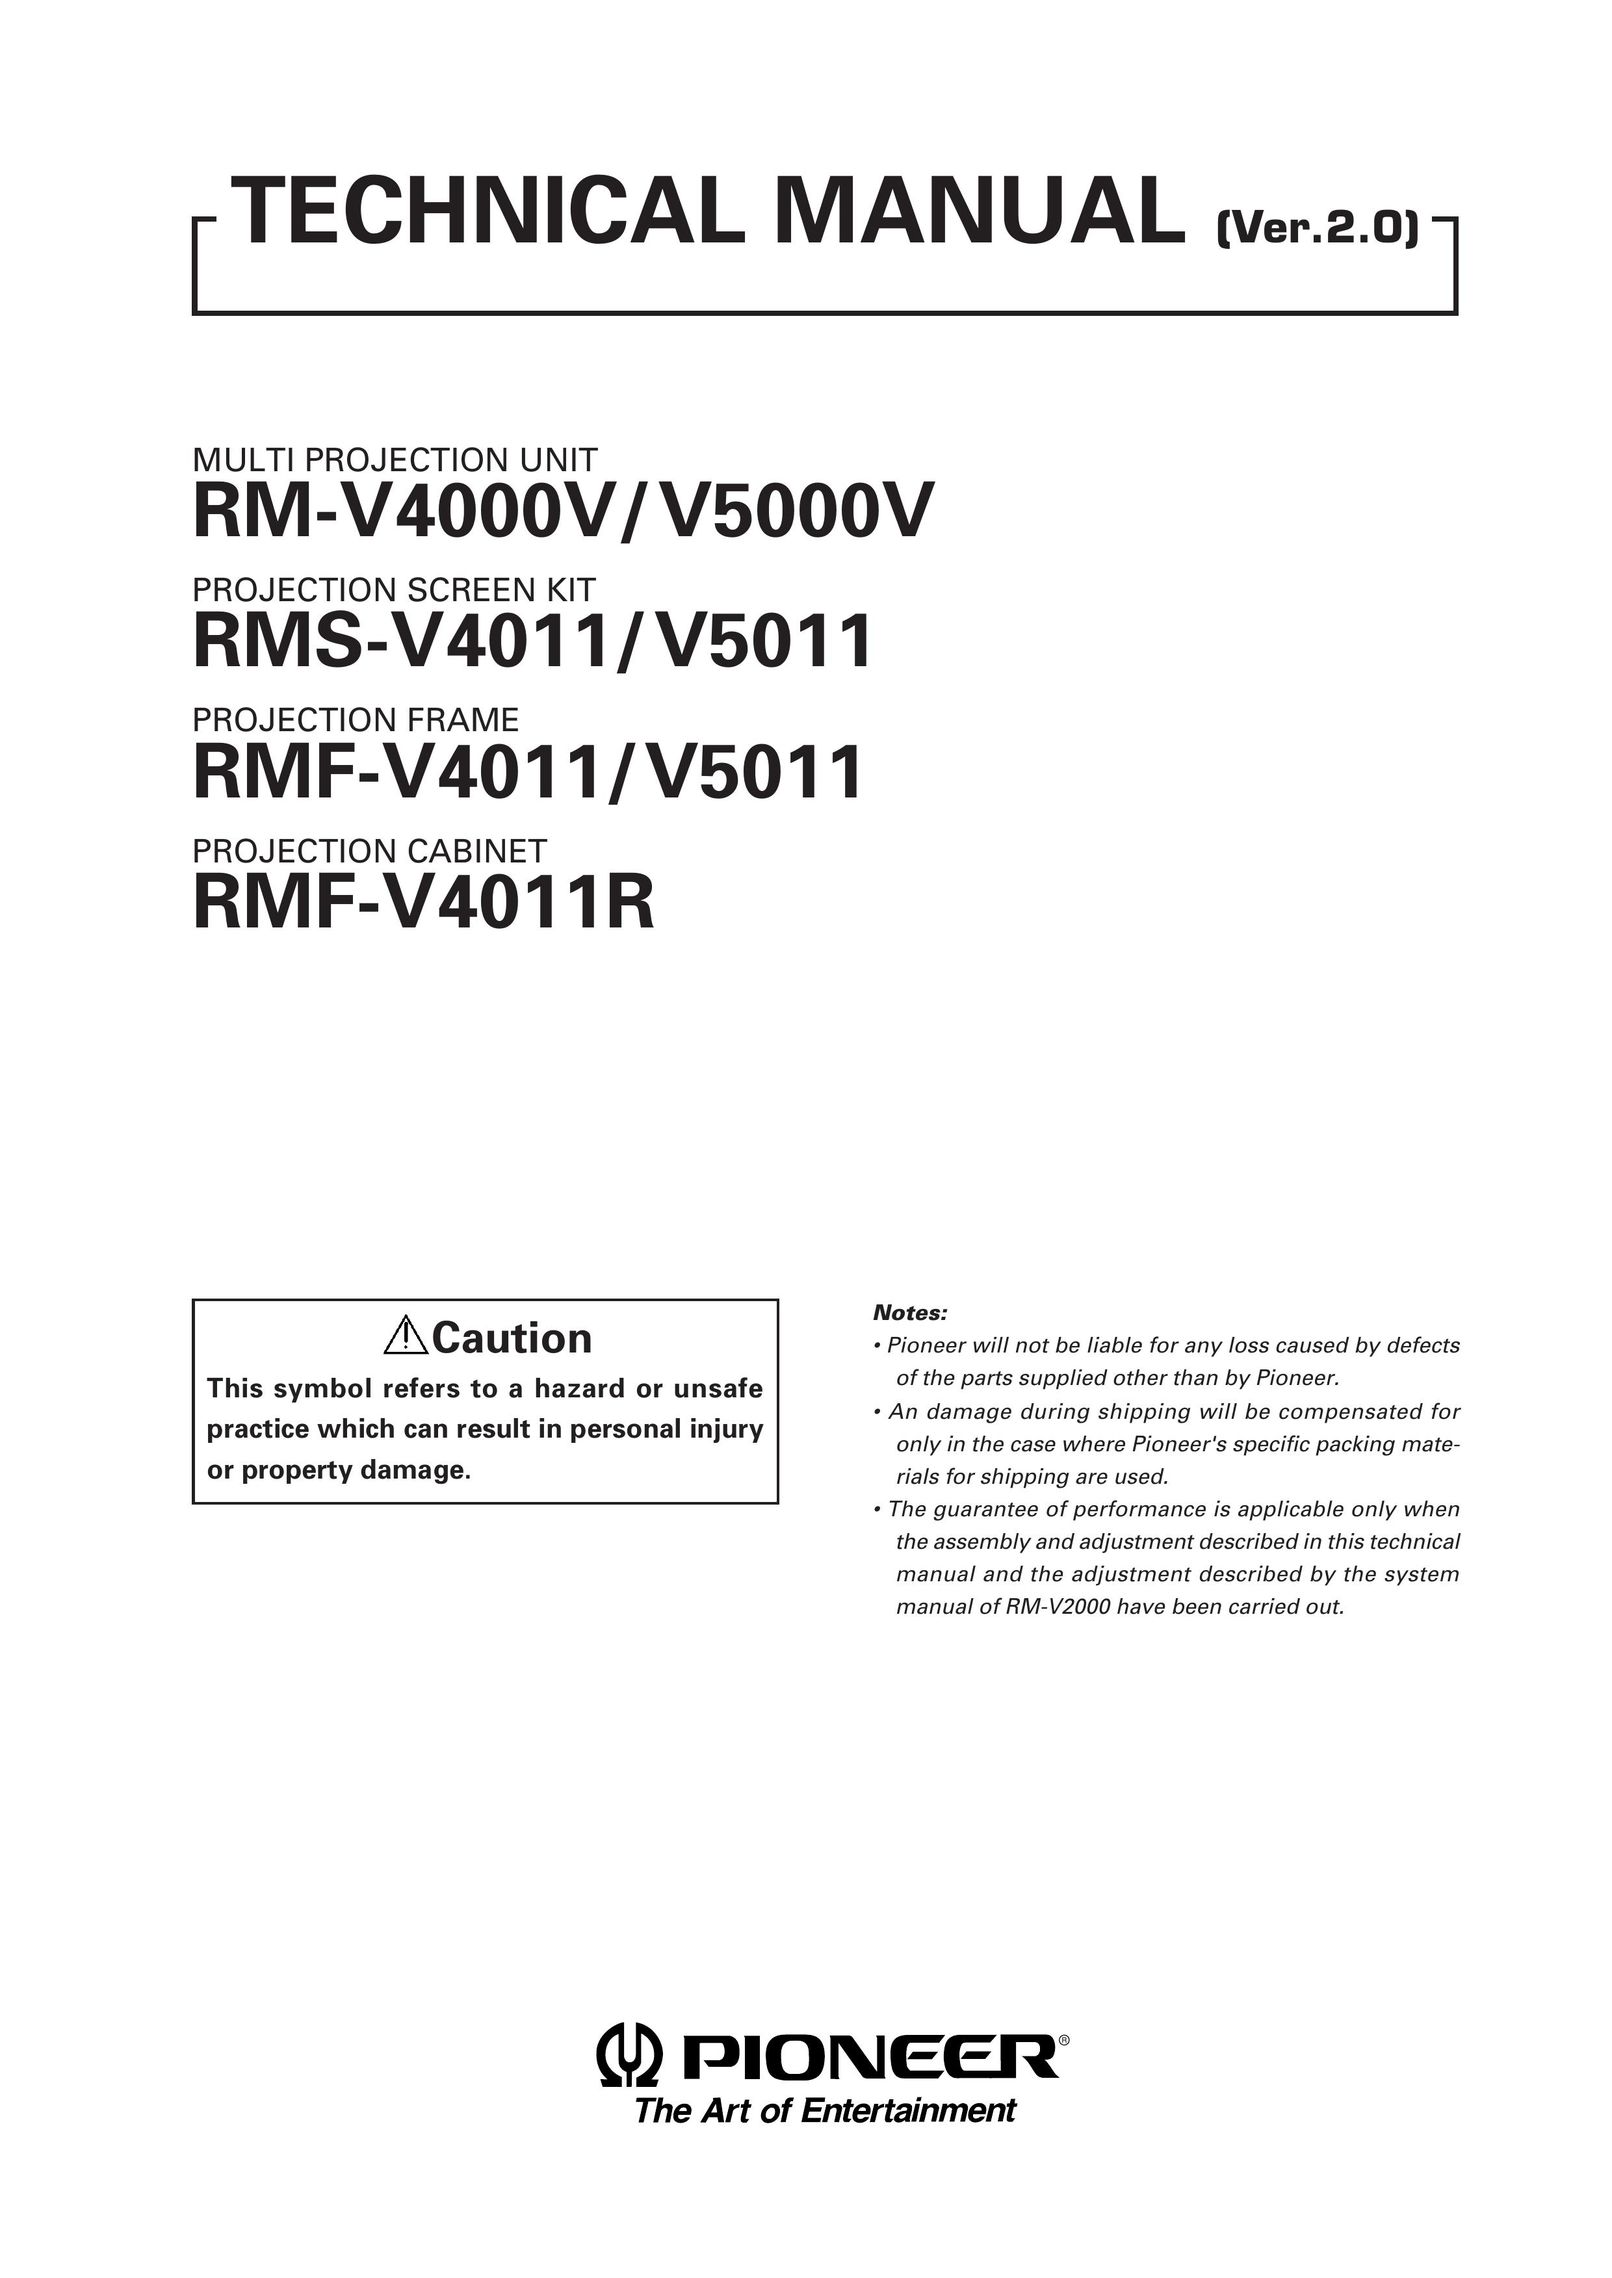 Pioneer RMS-V4011/V5011 Projector Accessories User Manual